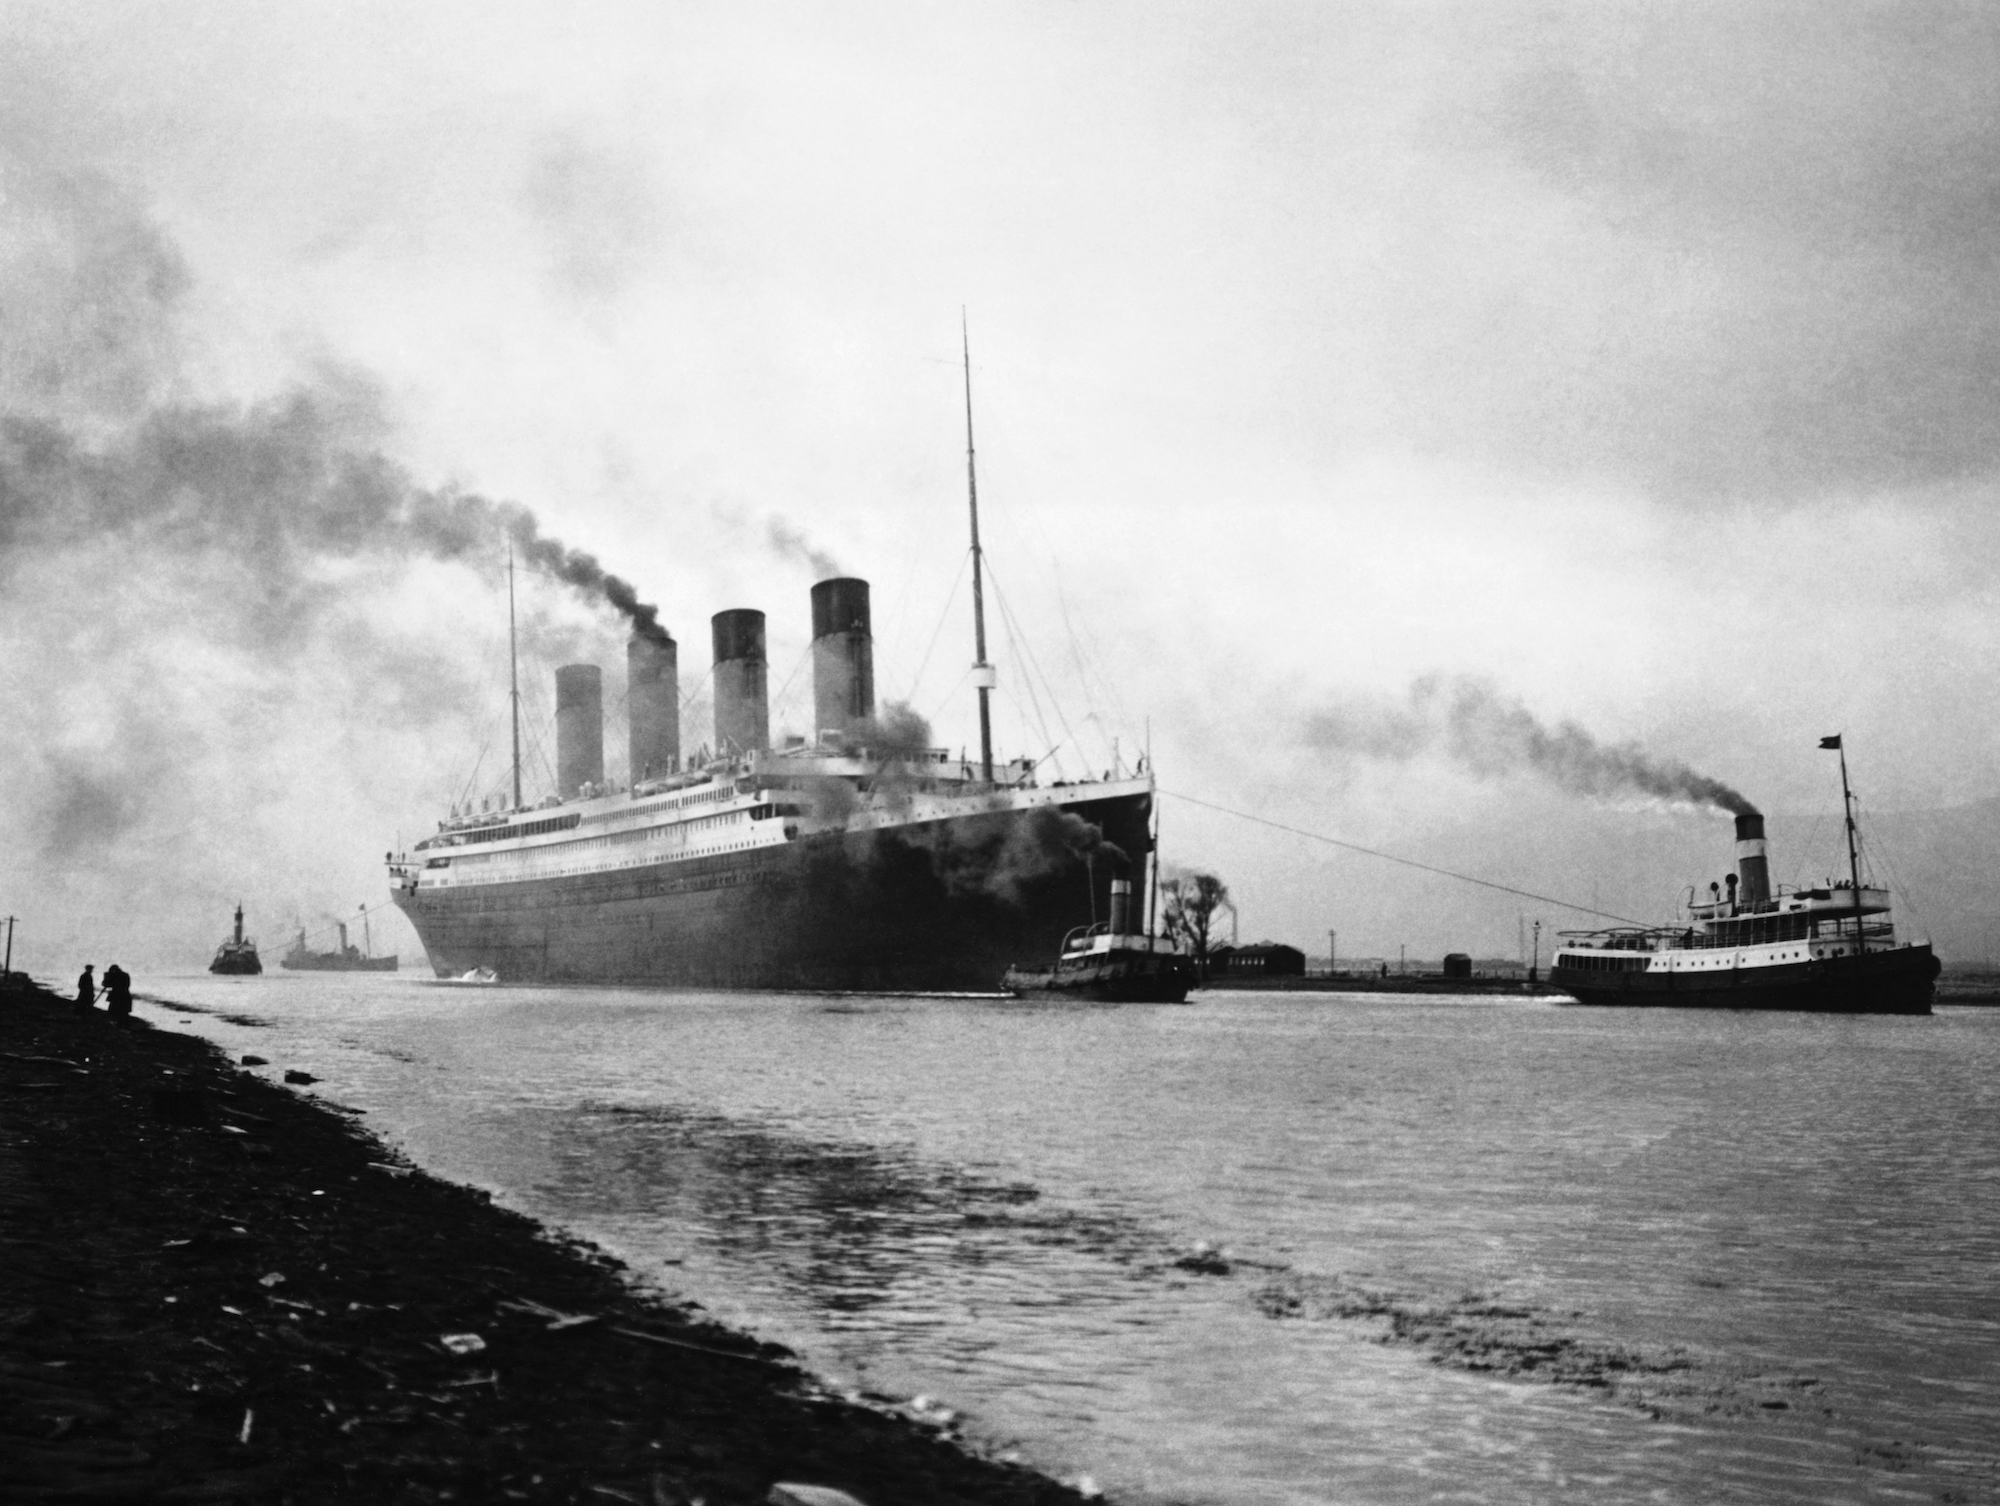 The RMS Titanic leaves Belfast in April of 1912.